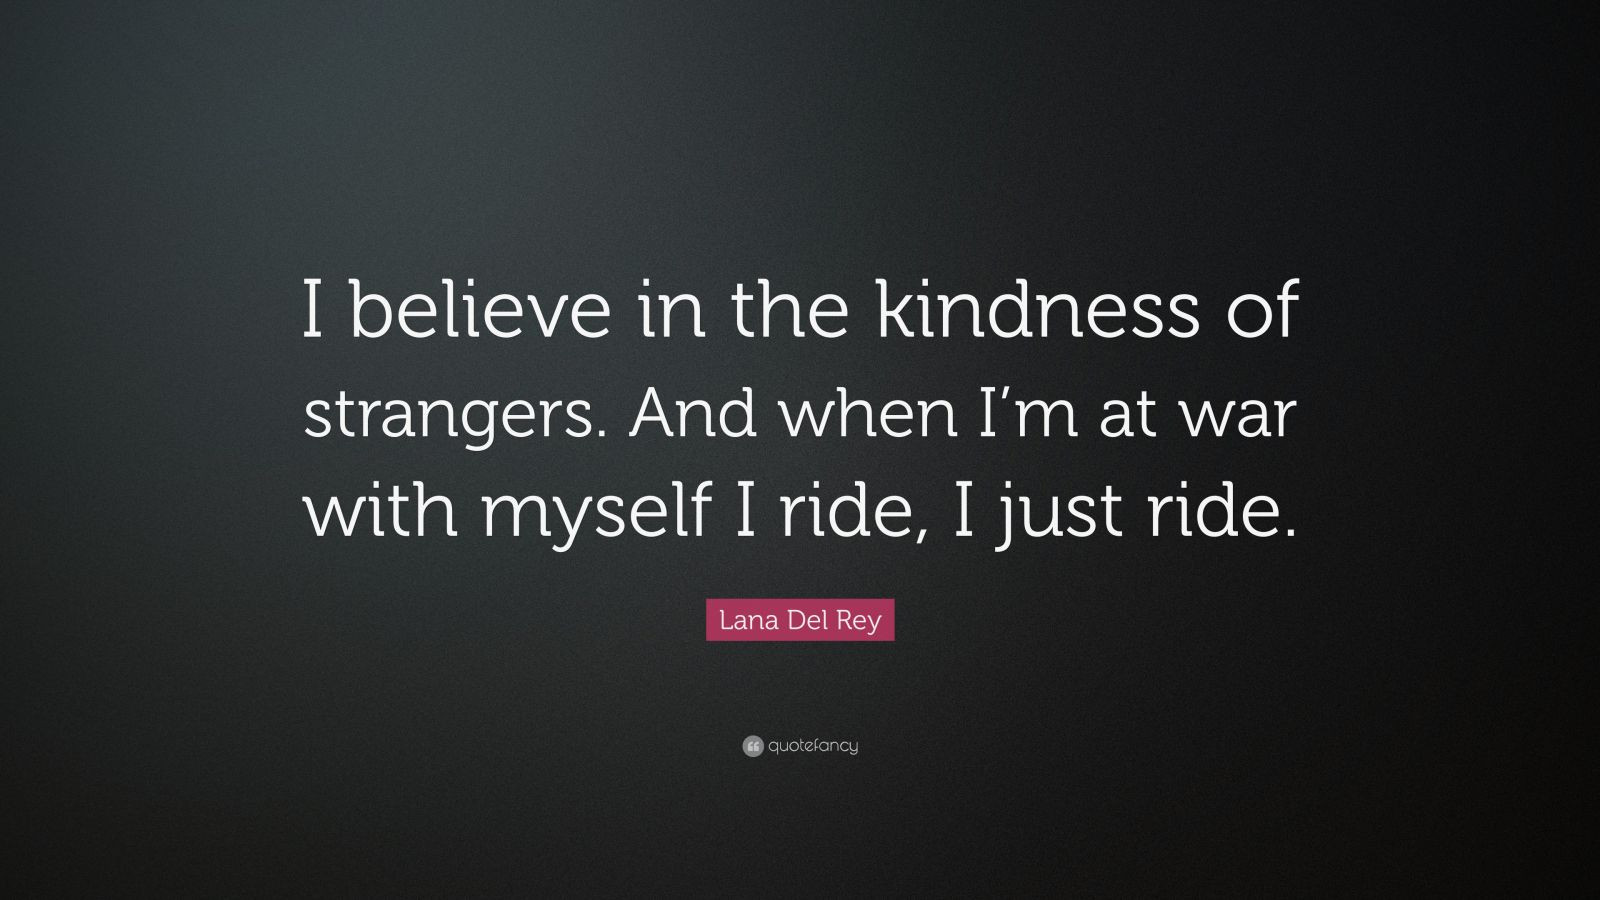 The Kindness Of Strangers Quote
 Lana Del Rey Quote “I believe in the kindness of